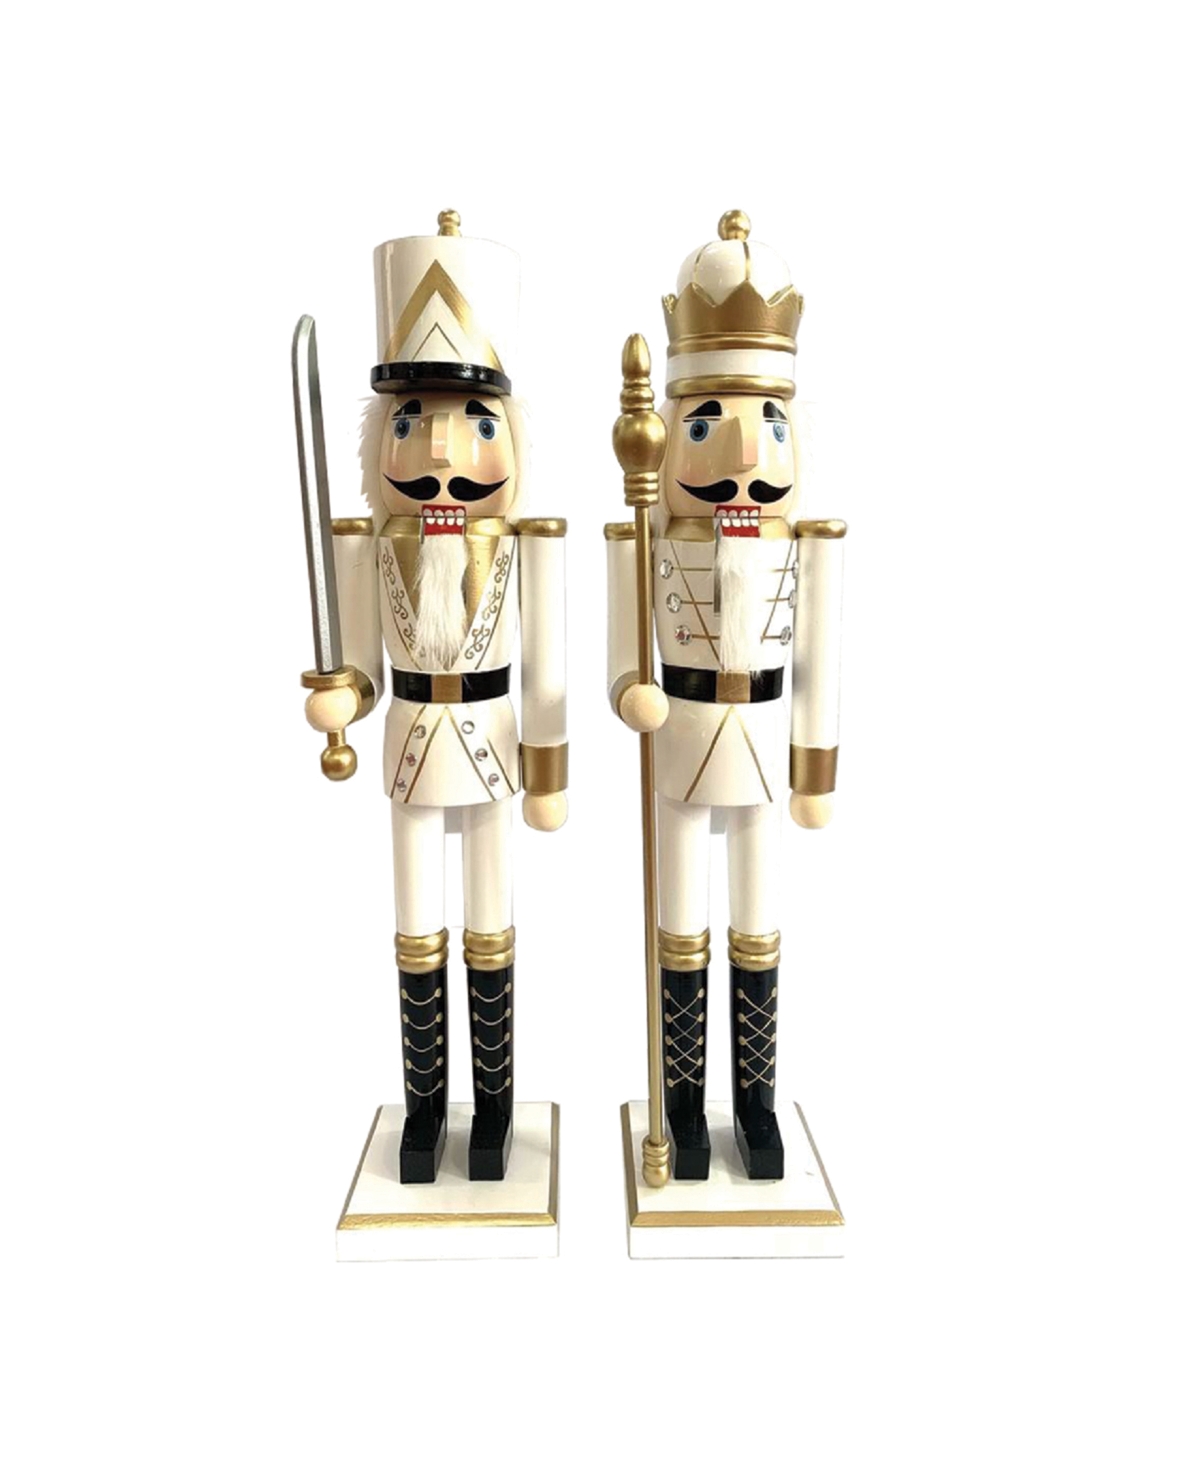 24" Gold-Tone King and Guard Nutcracker, Set of 2 - White